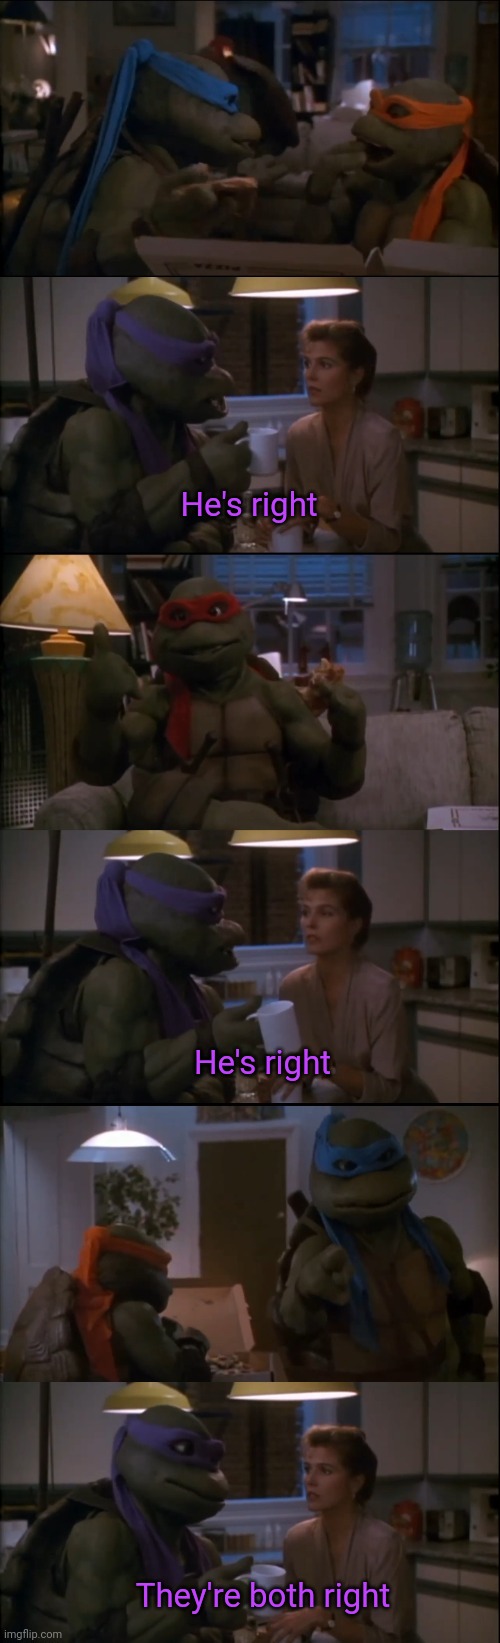 Tmnt they're both right | He's right; He's right; They're both right | image tagged in they're both right,tmnt,ninja turtles,argument,he's right | made w/ Imgflip meme maker